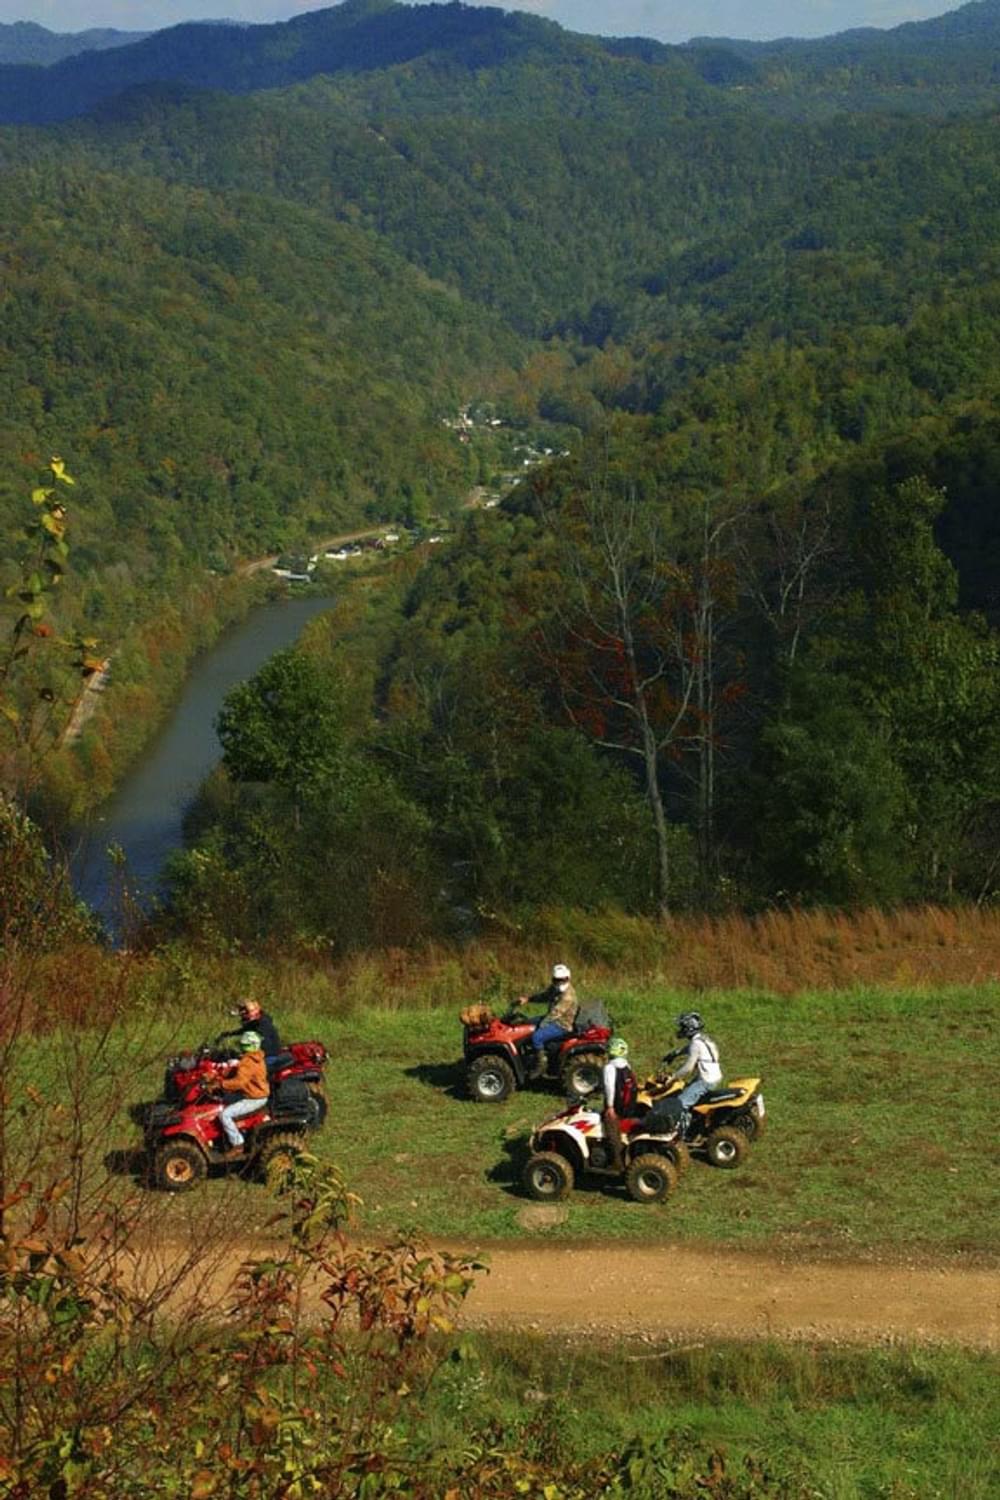 Sightseeing ATV riders on the Hatfield-McCoy Trail System in West Virginia